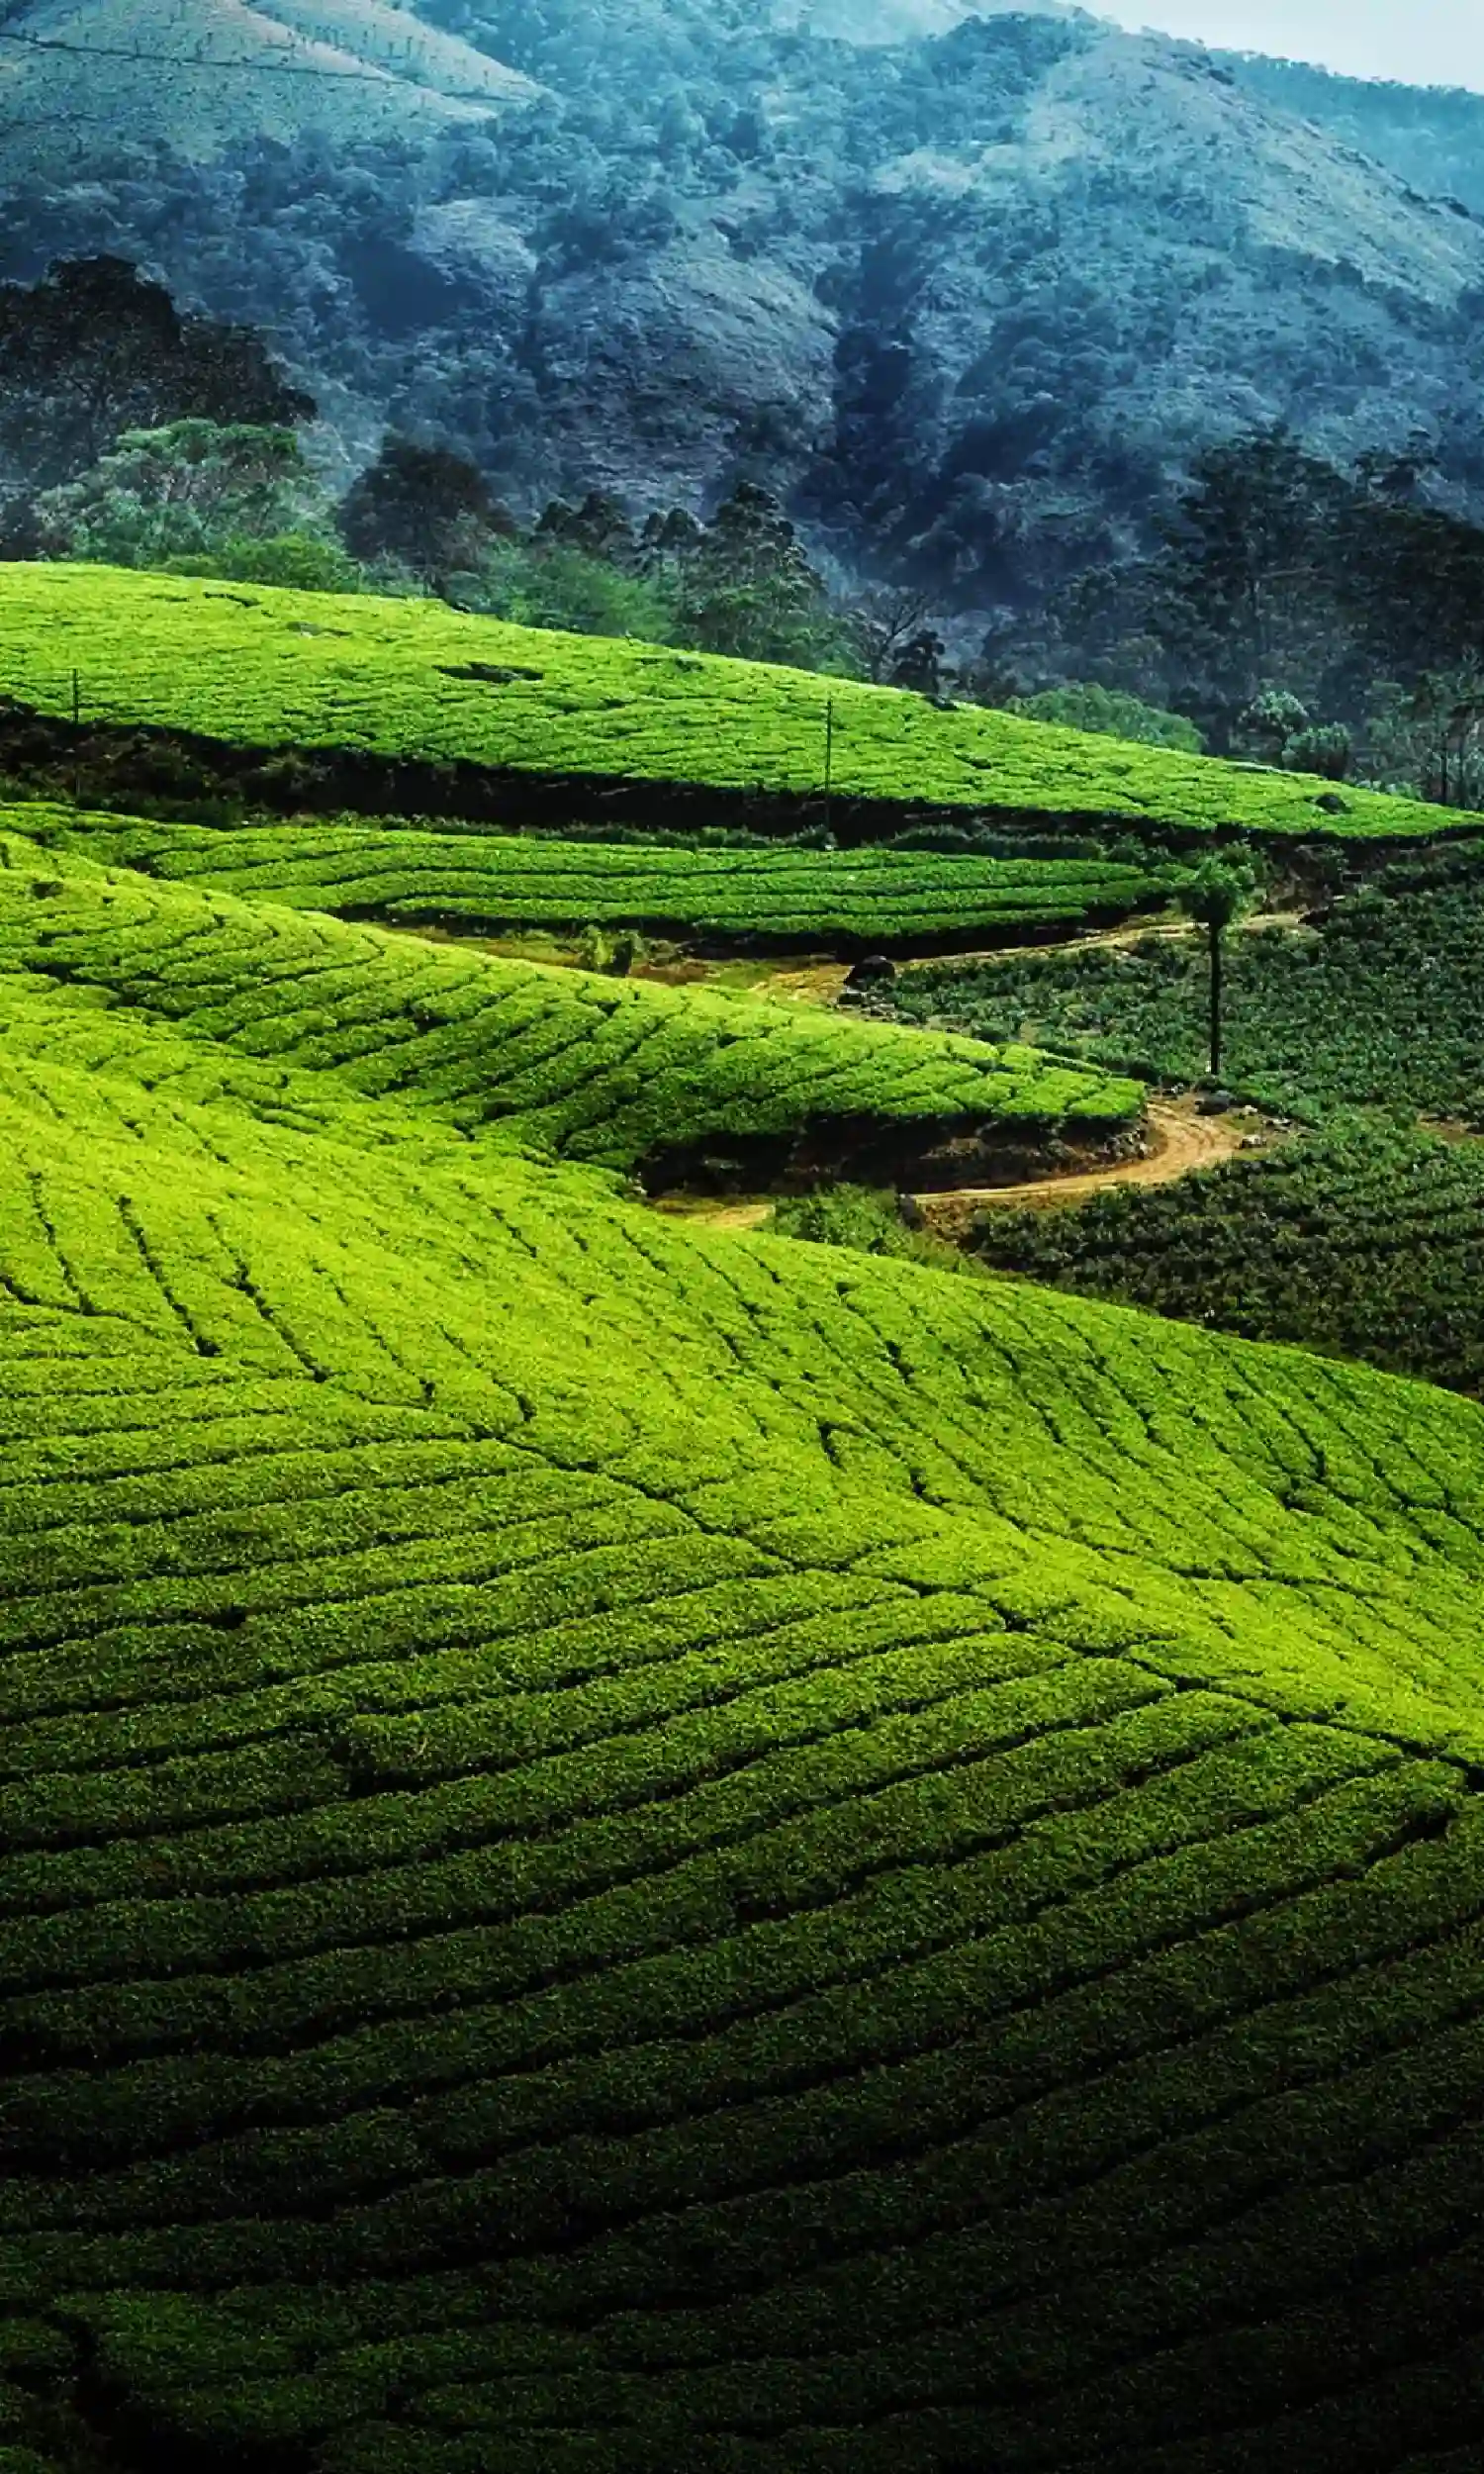 5 Days Kerala Tour Package with Munnar Alleppey and Thekkady